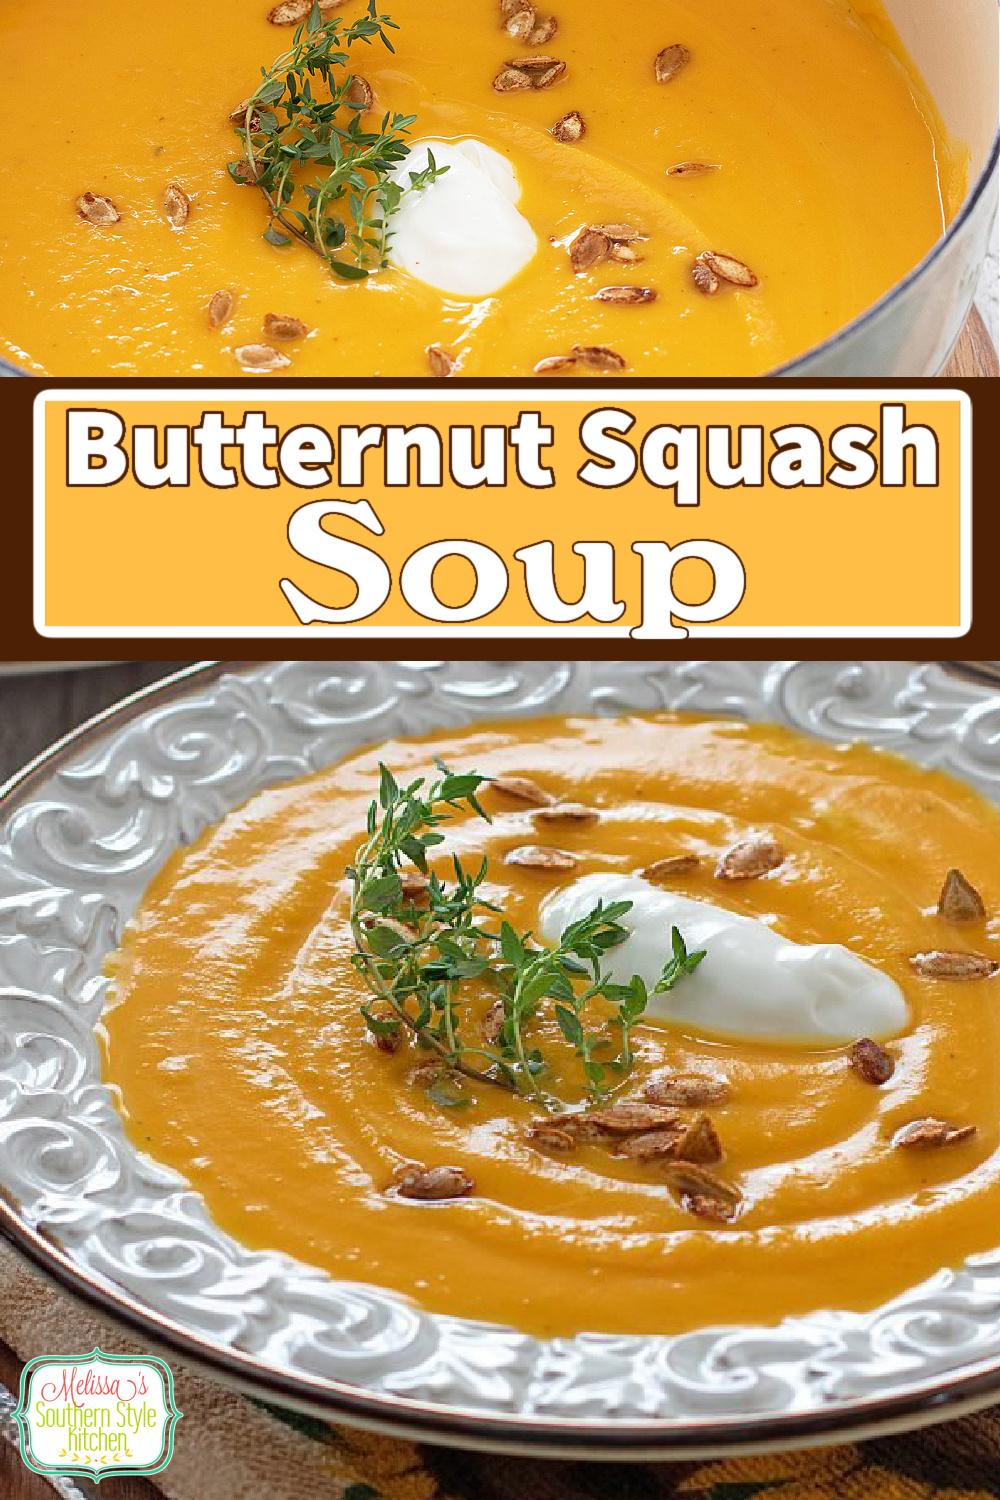 This rich Butternut Squash Soup Recipe can be served as a starter or a main dish entrée with a side of crusty bread for dipping #butternutsquashsoup #butternutsquashrecipe #soup #souprecipe #butternutsquashrecipes via @melissasssk